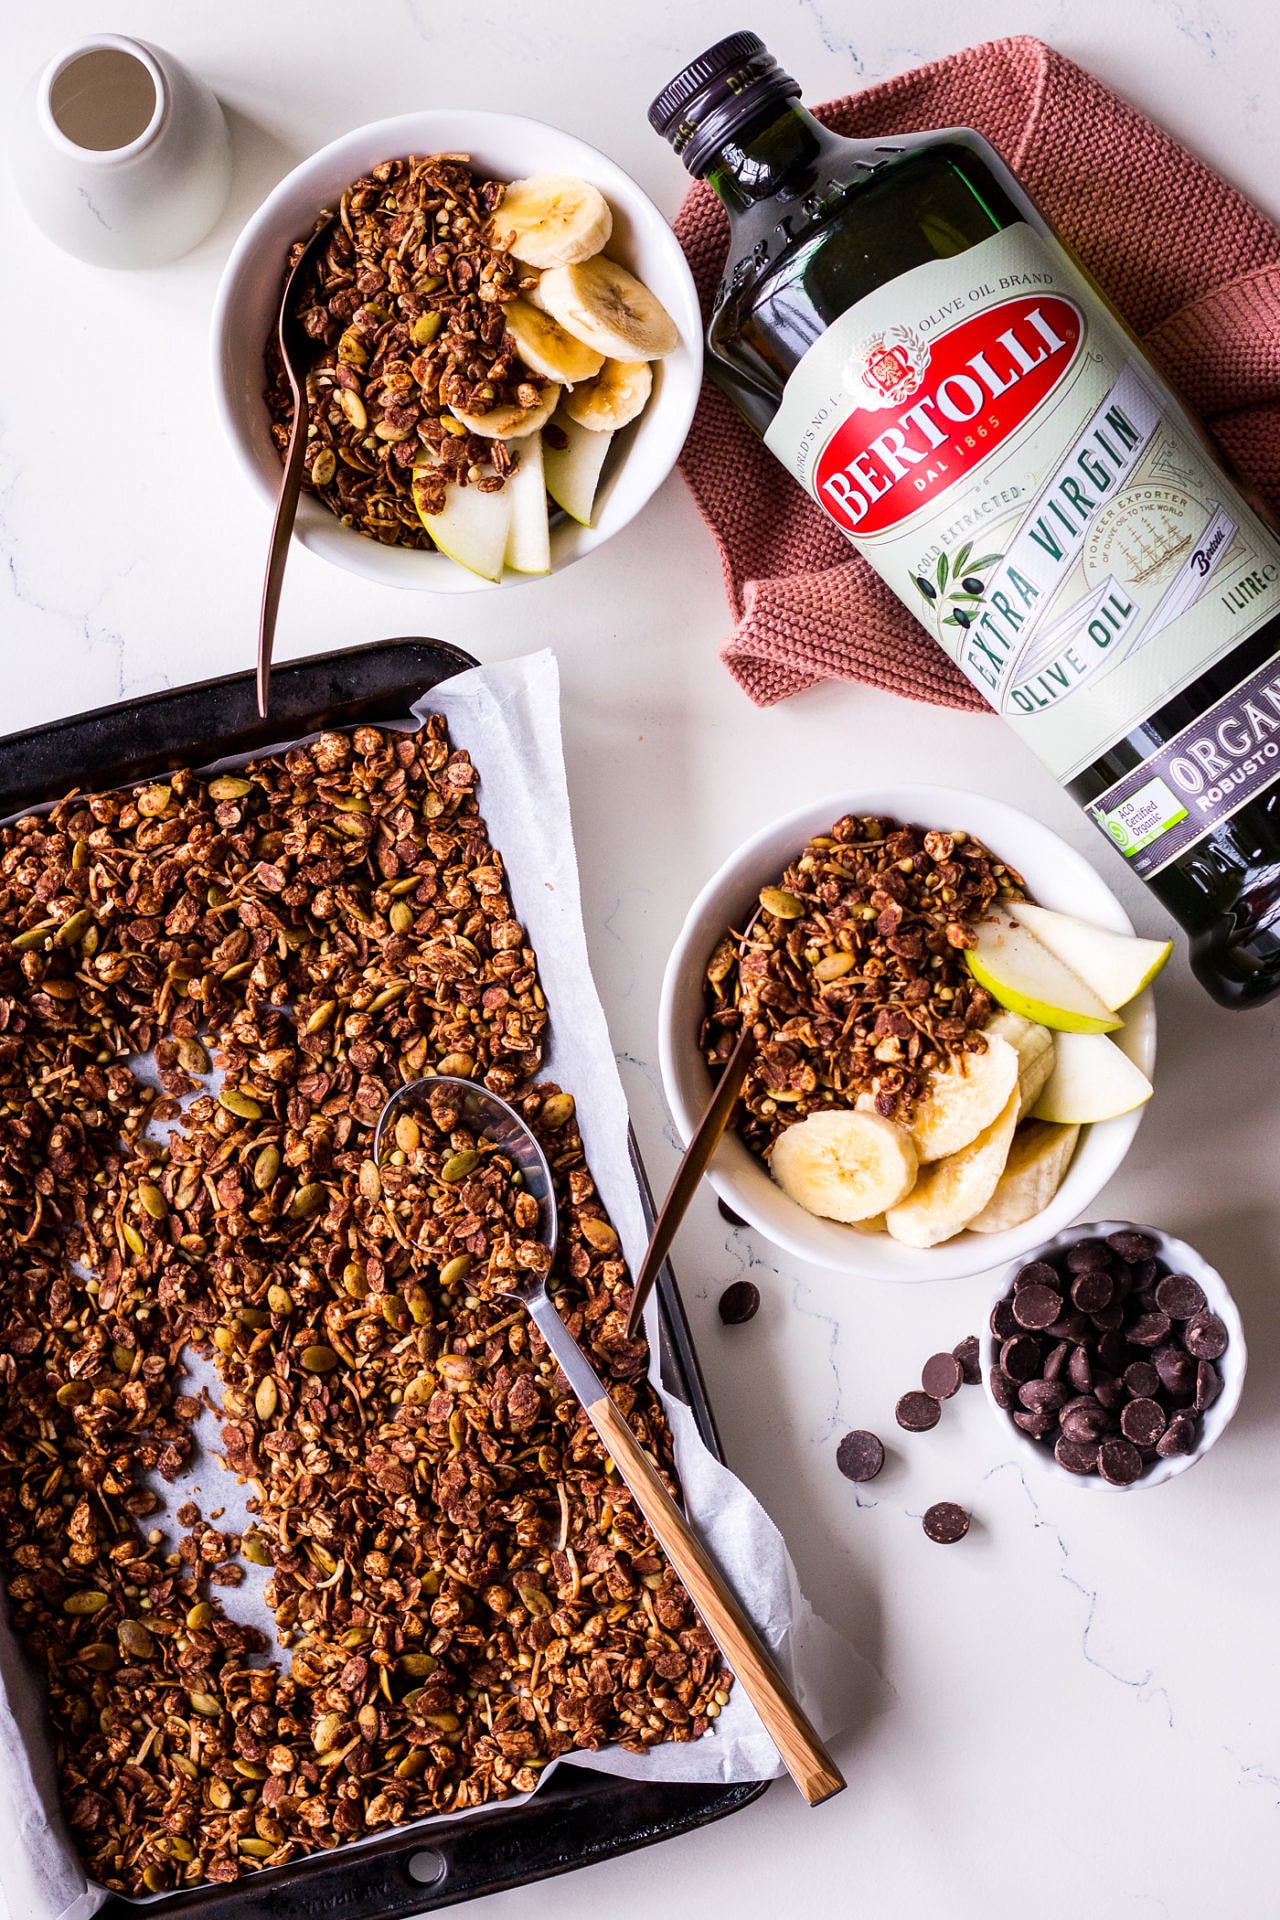 Bottle of Bertolli Organic Extra Virgin Olive Oil laid next to a baking tray and two small bowls with fruit and chocolate granola